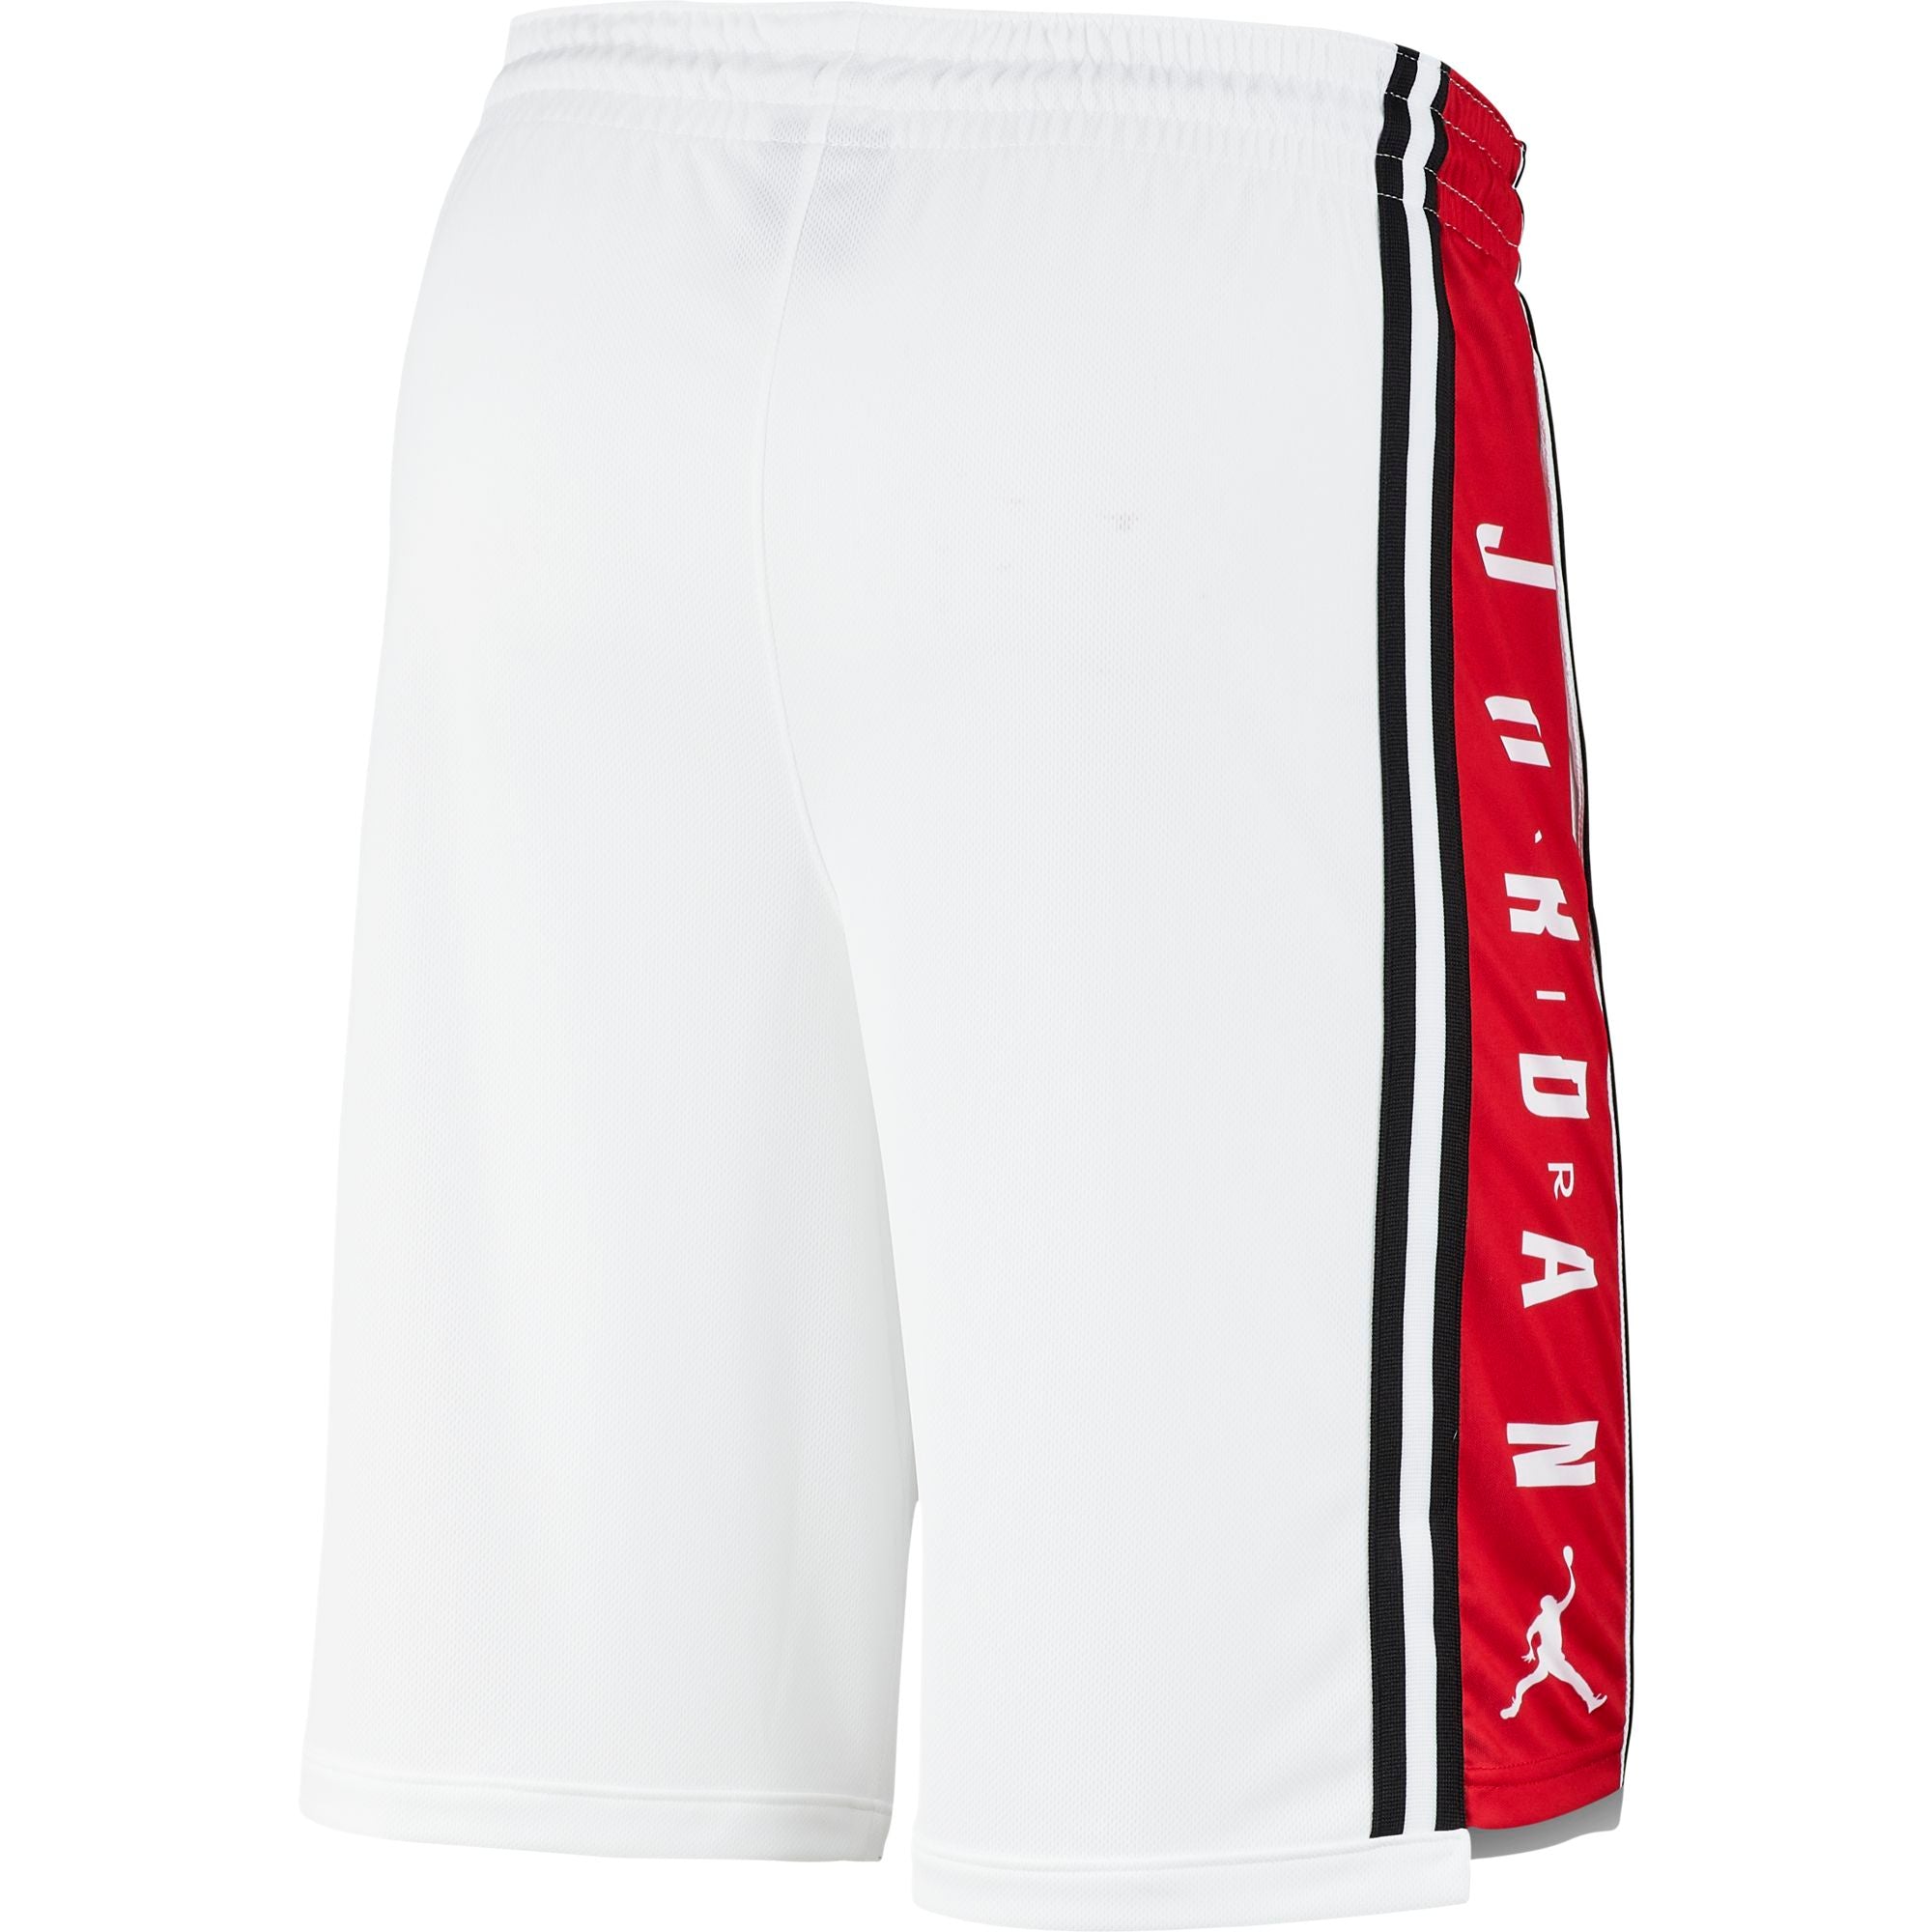 nike shorts red black and white